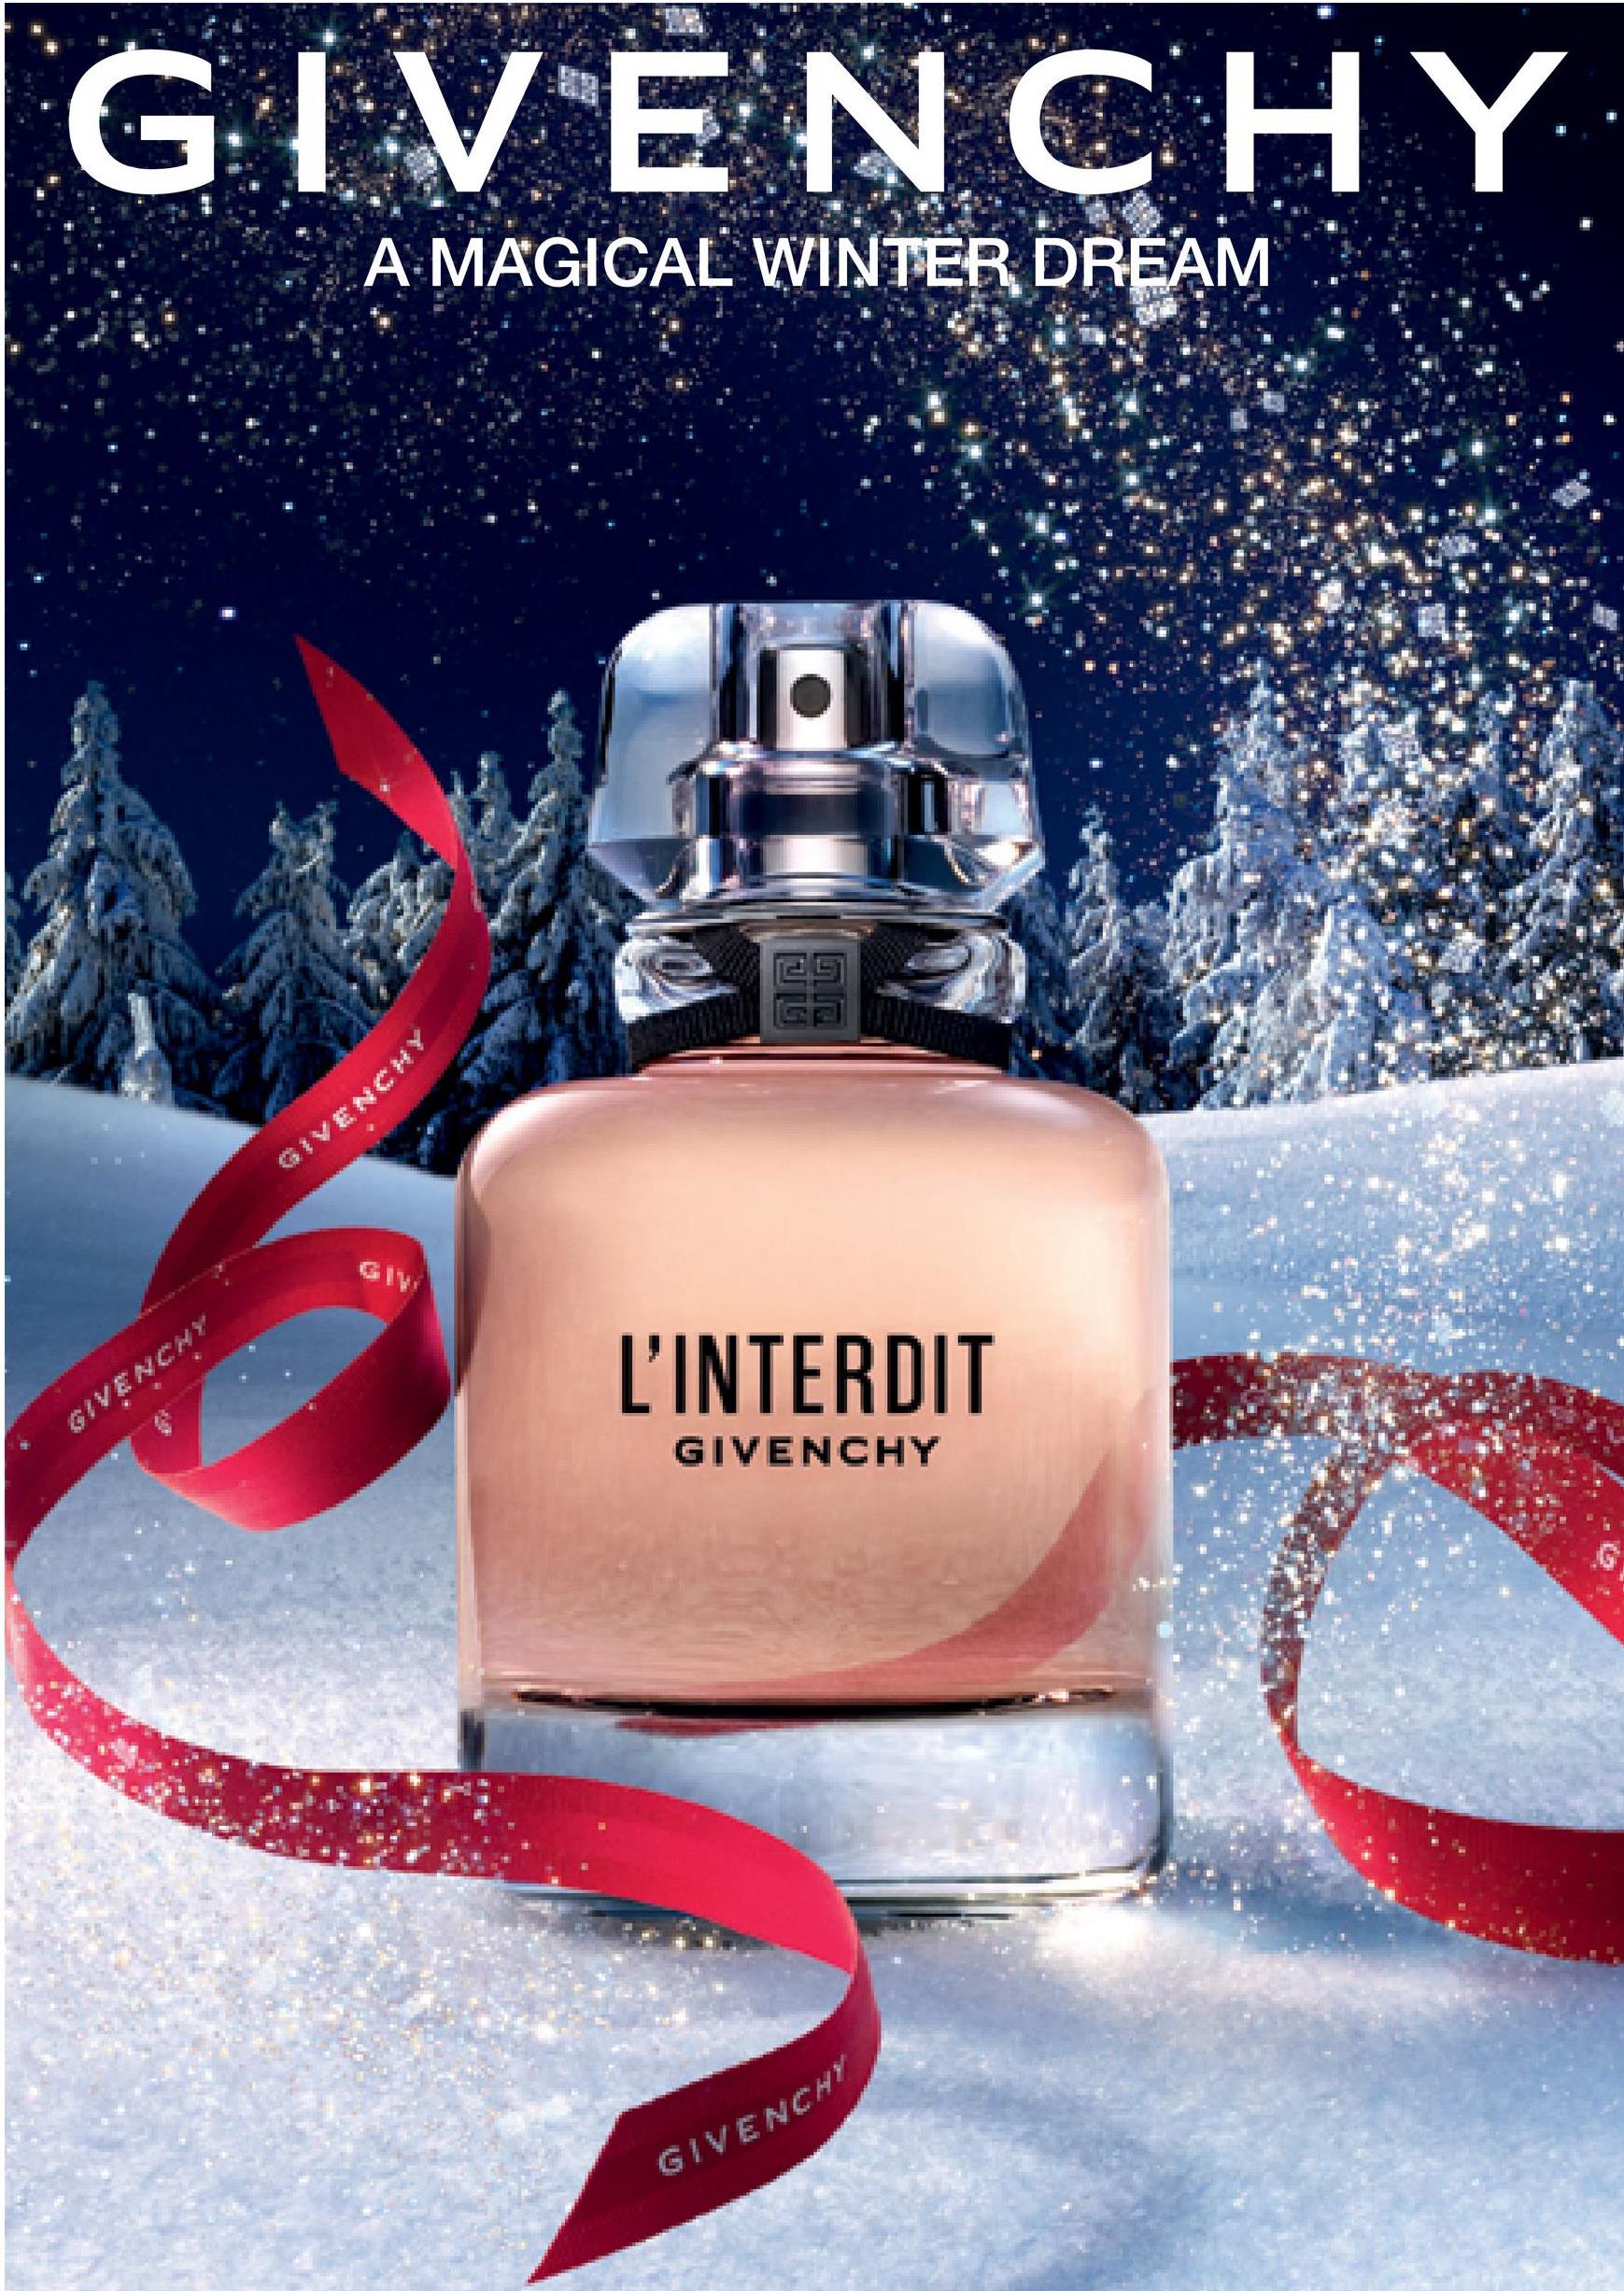 GIVENCHY
A MAGICAL WINTER DREAM
GIVENCHY
GIVENCHY
no
L'INTERDIT
GIVENCHY
GIVENCHY